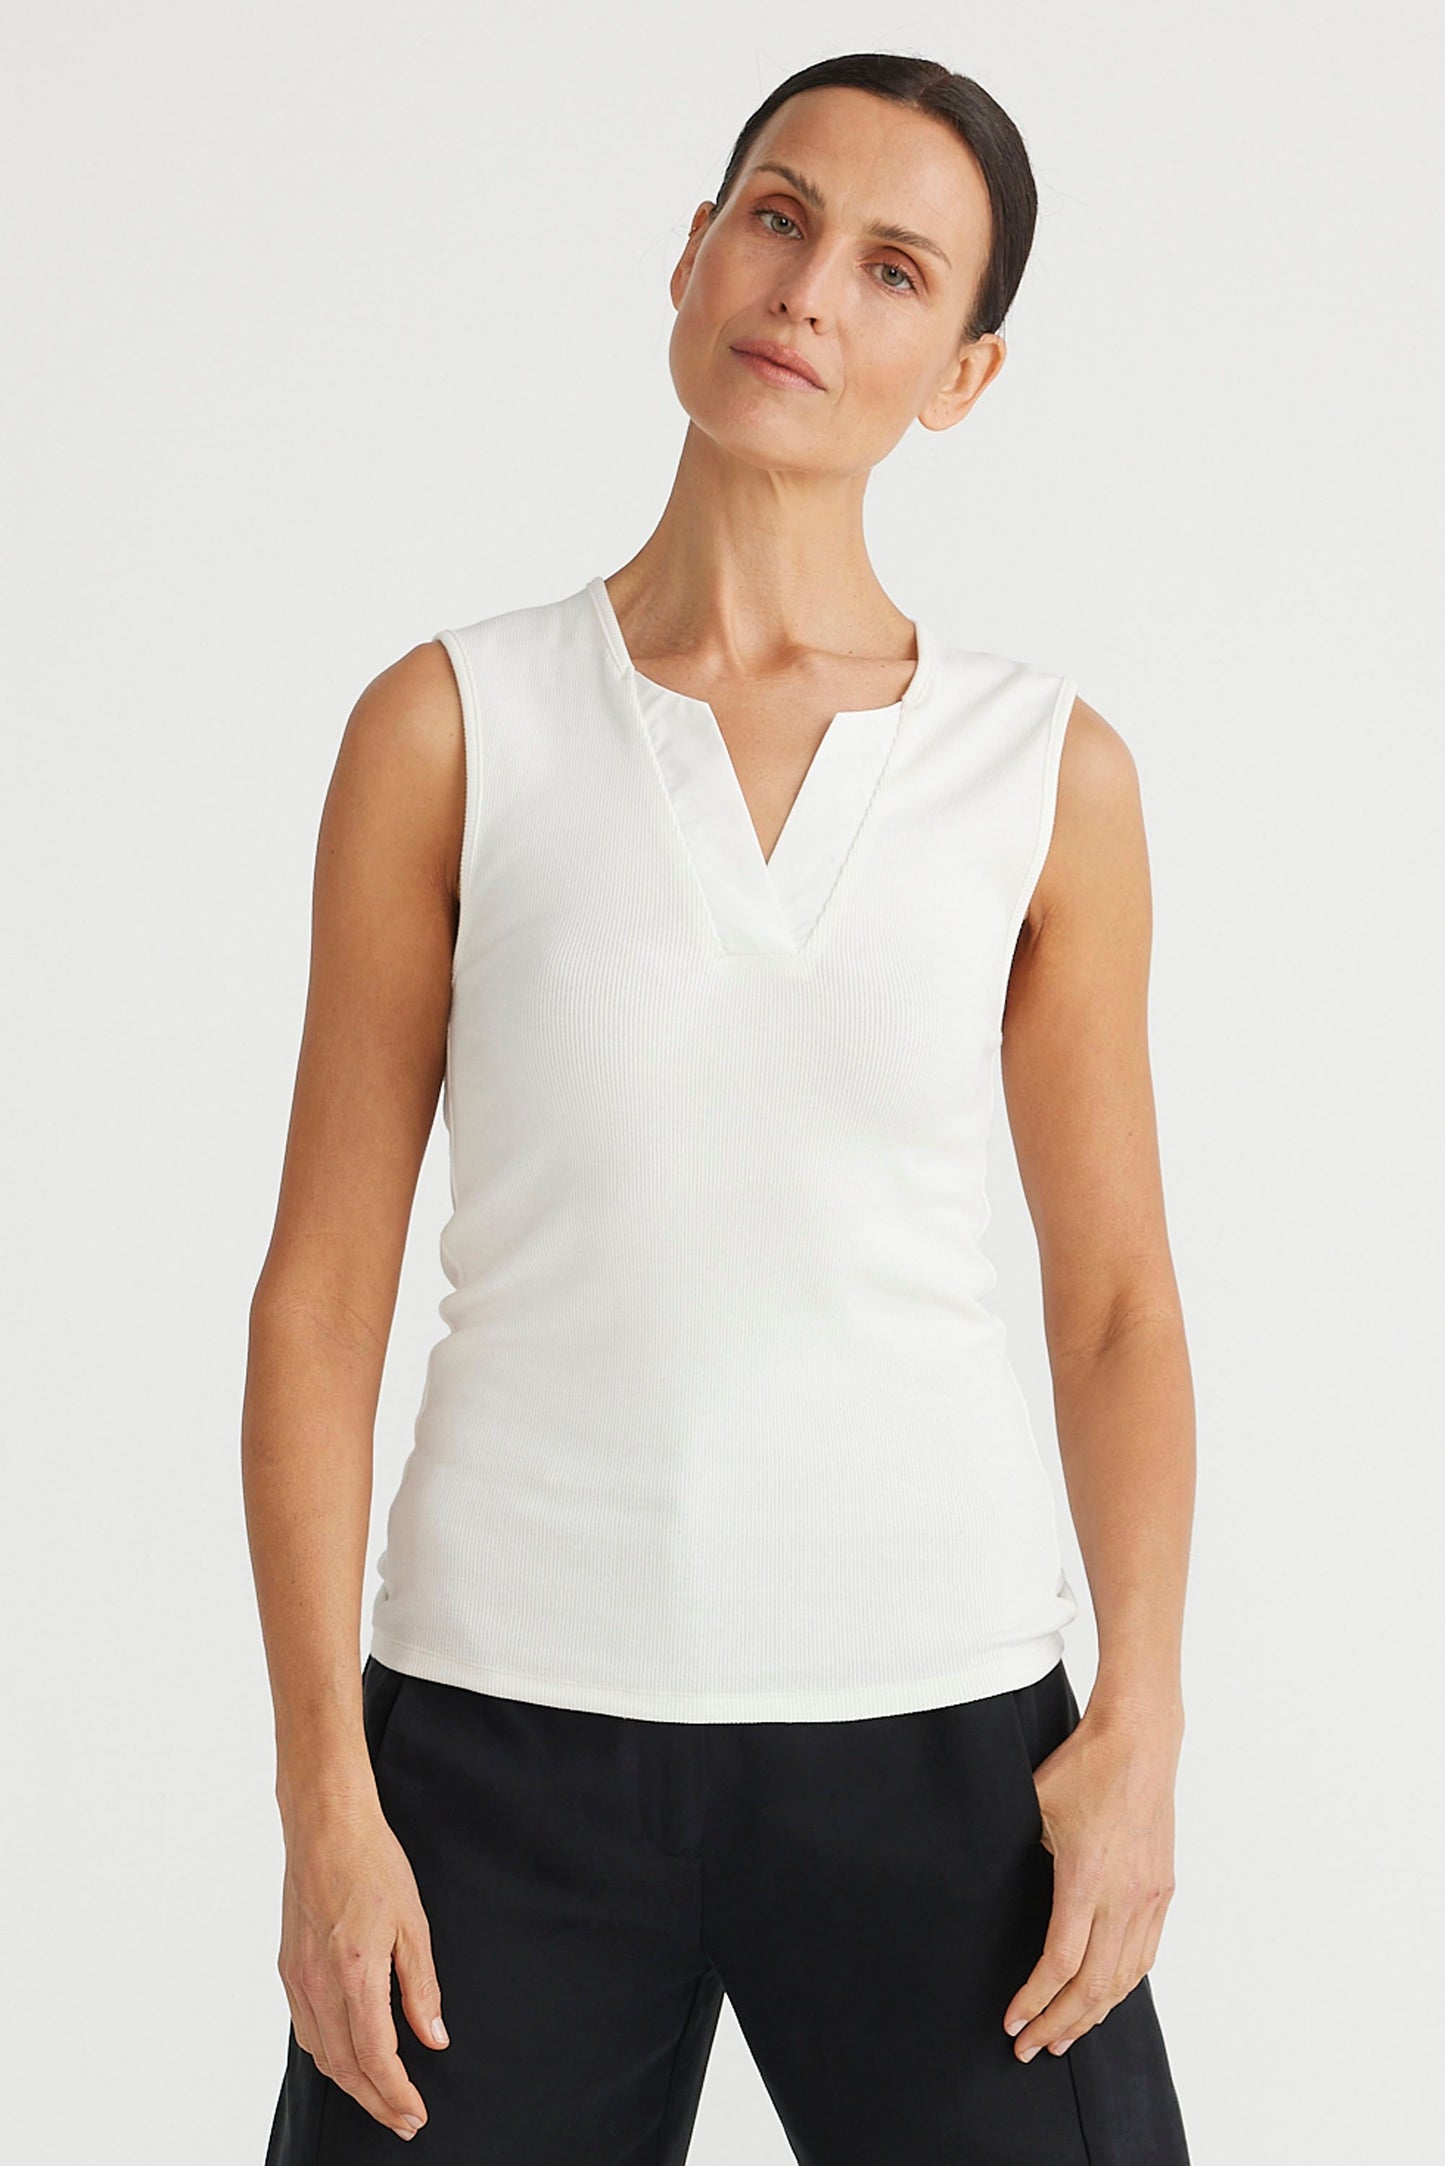 Henley Tank - White - 40% OFF AT CHECKOUT